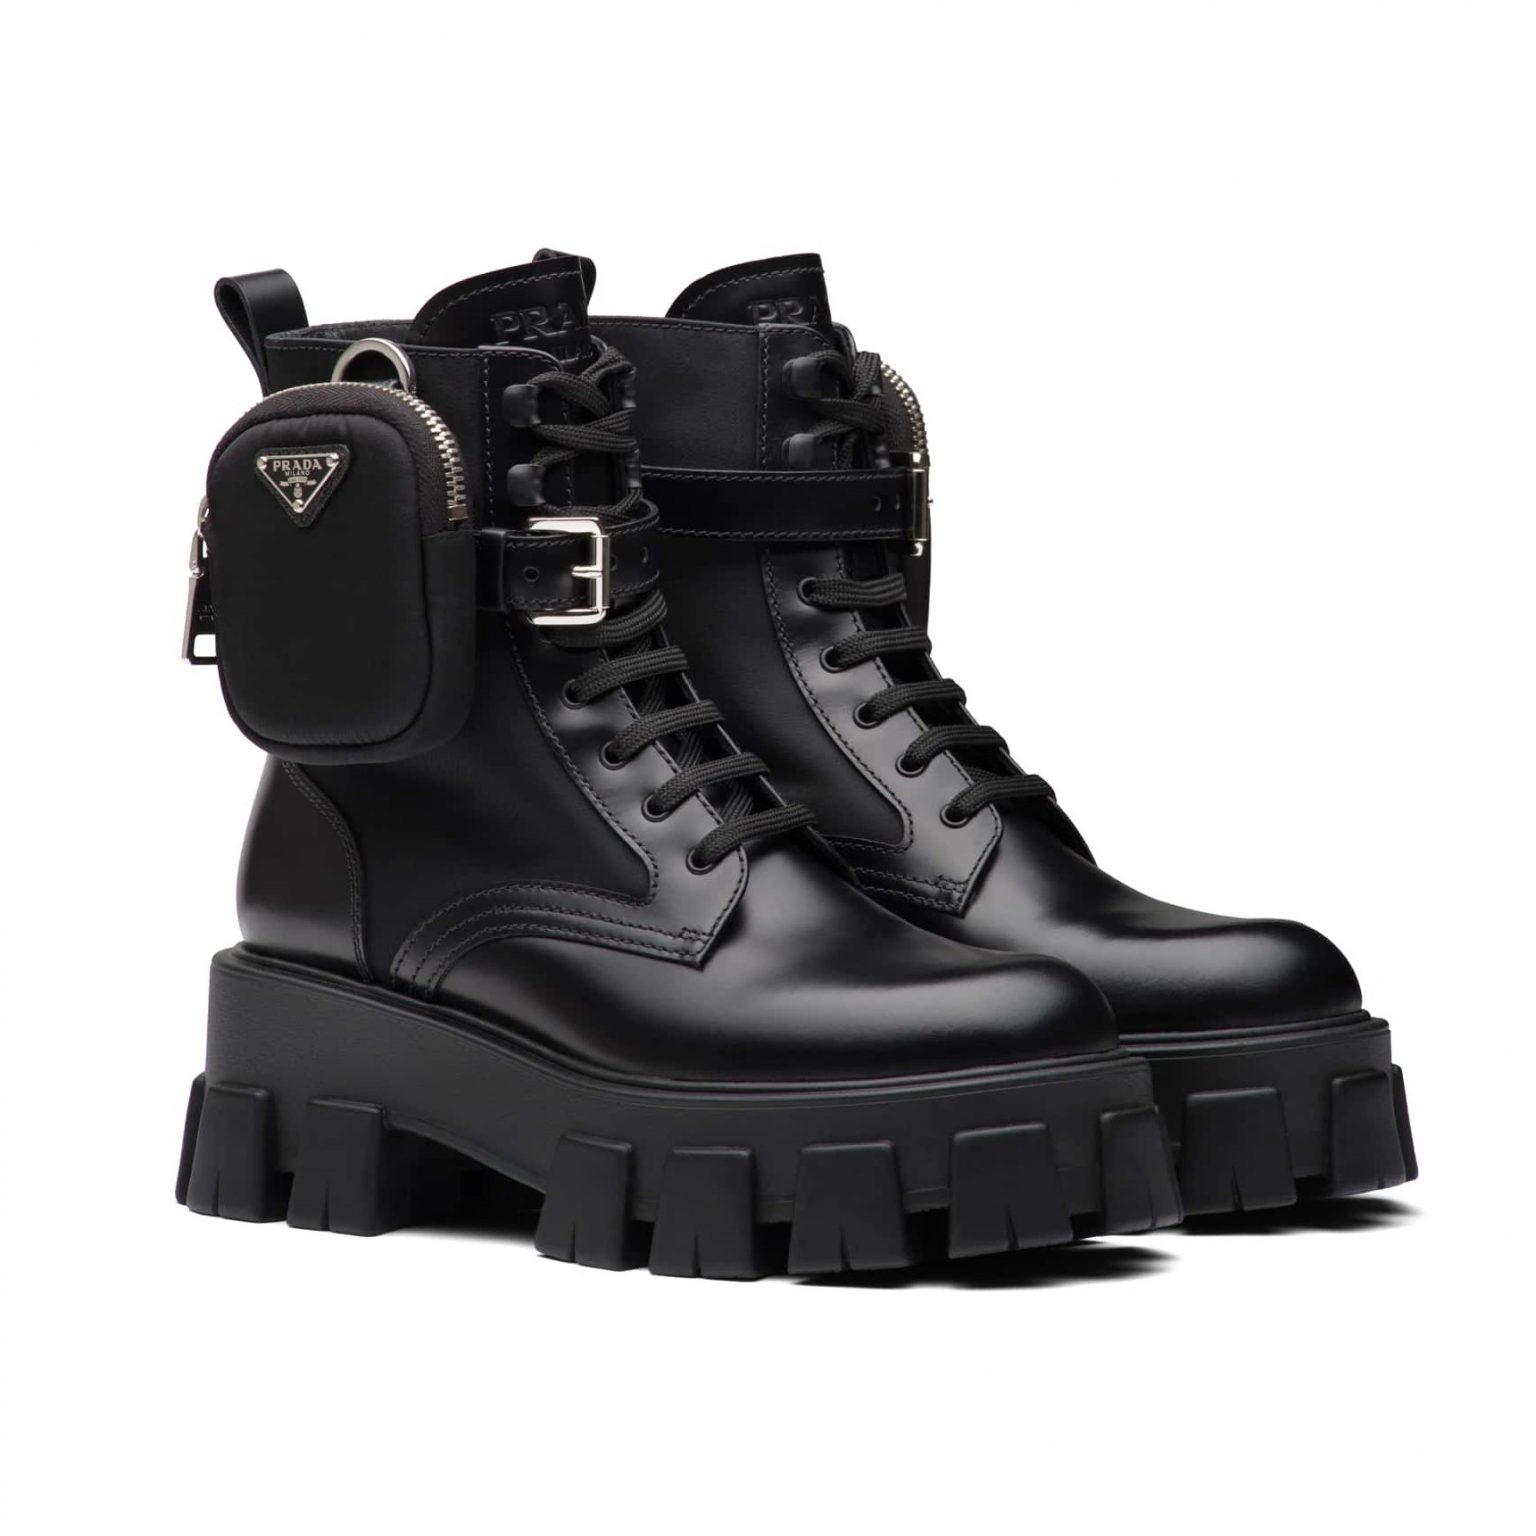 20 Best Prada Boots For Women - Read This First